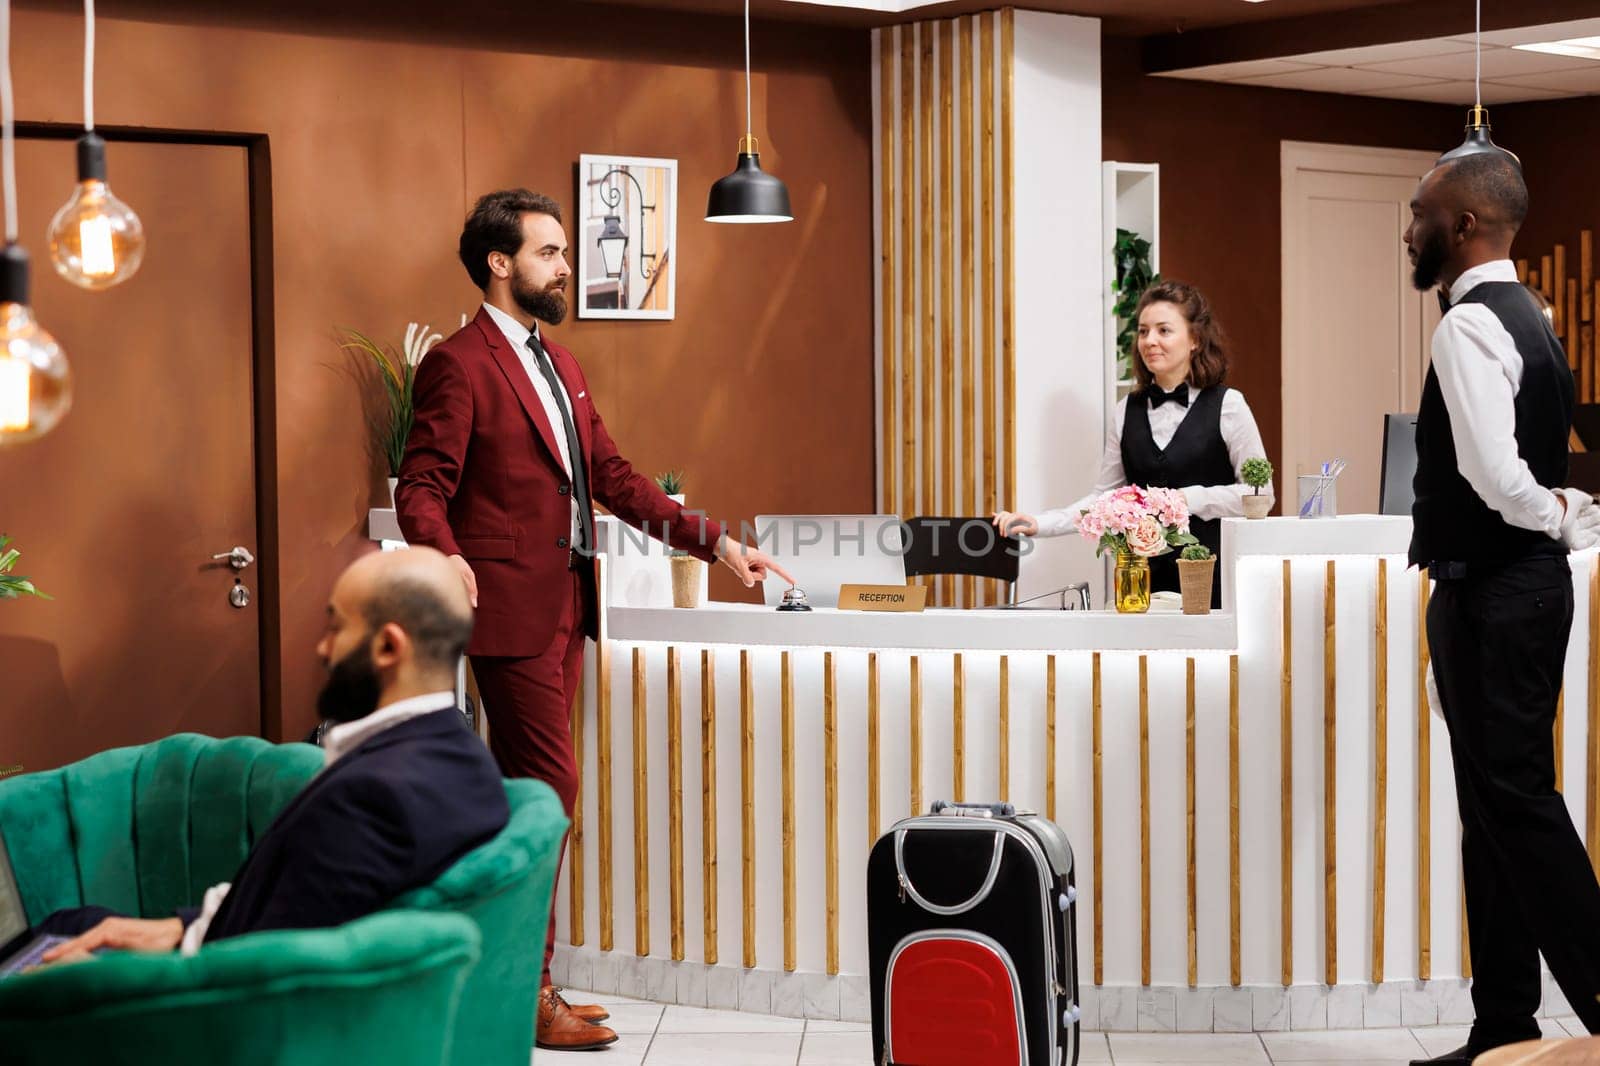 Front desk staff greets businessman with suitcase baggage, travelling on work trip and staying at luxury hotel. Formal person entering lobby to ask about room reservation, registration.